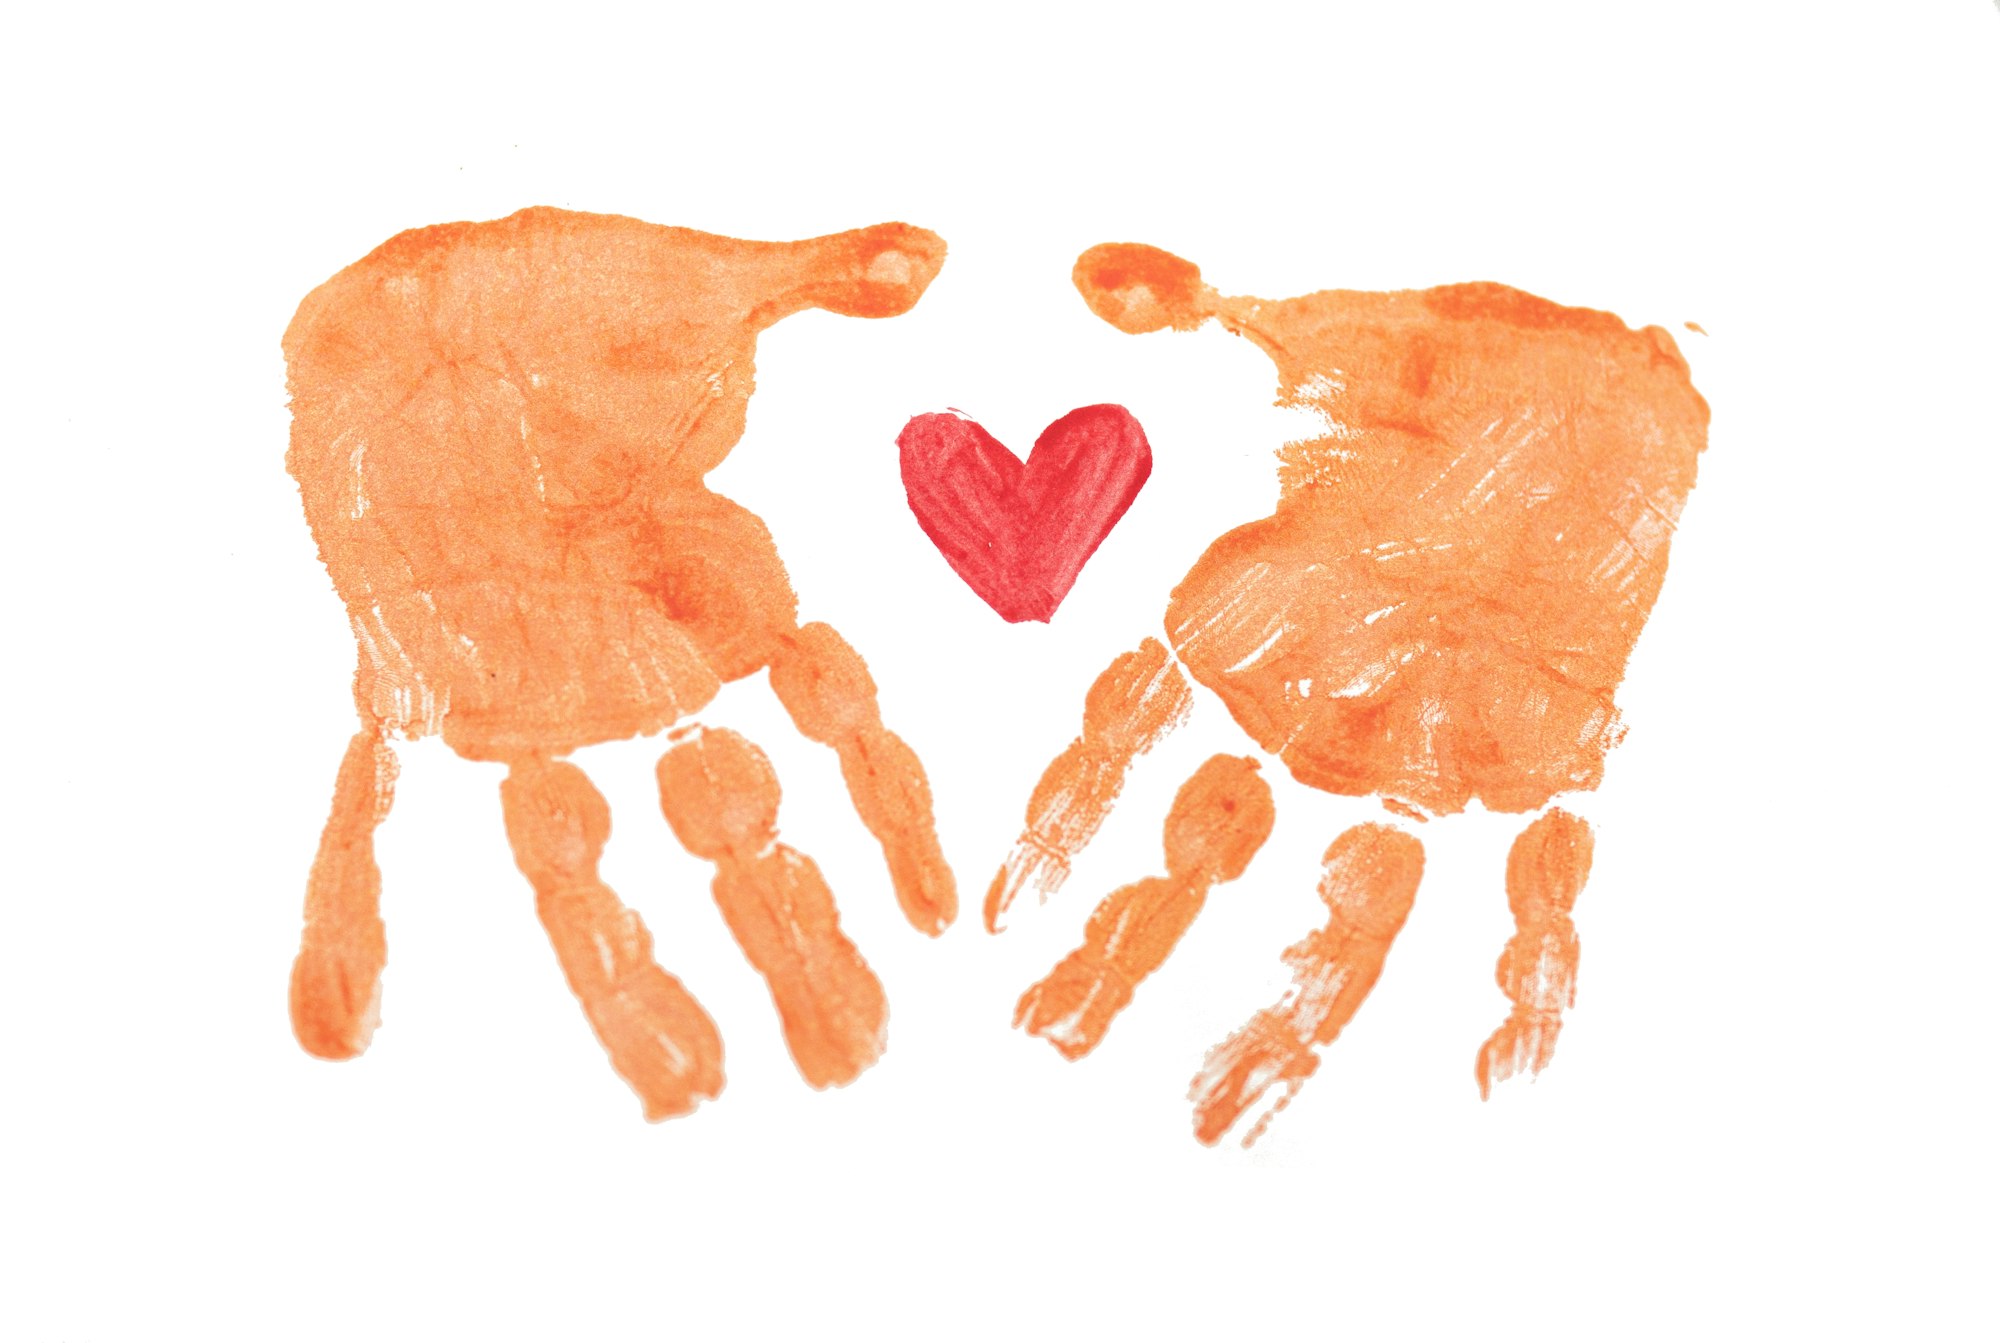 A child's hands imprint showing their love